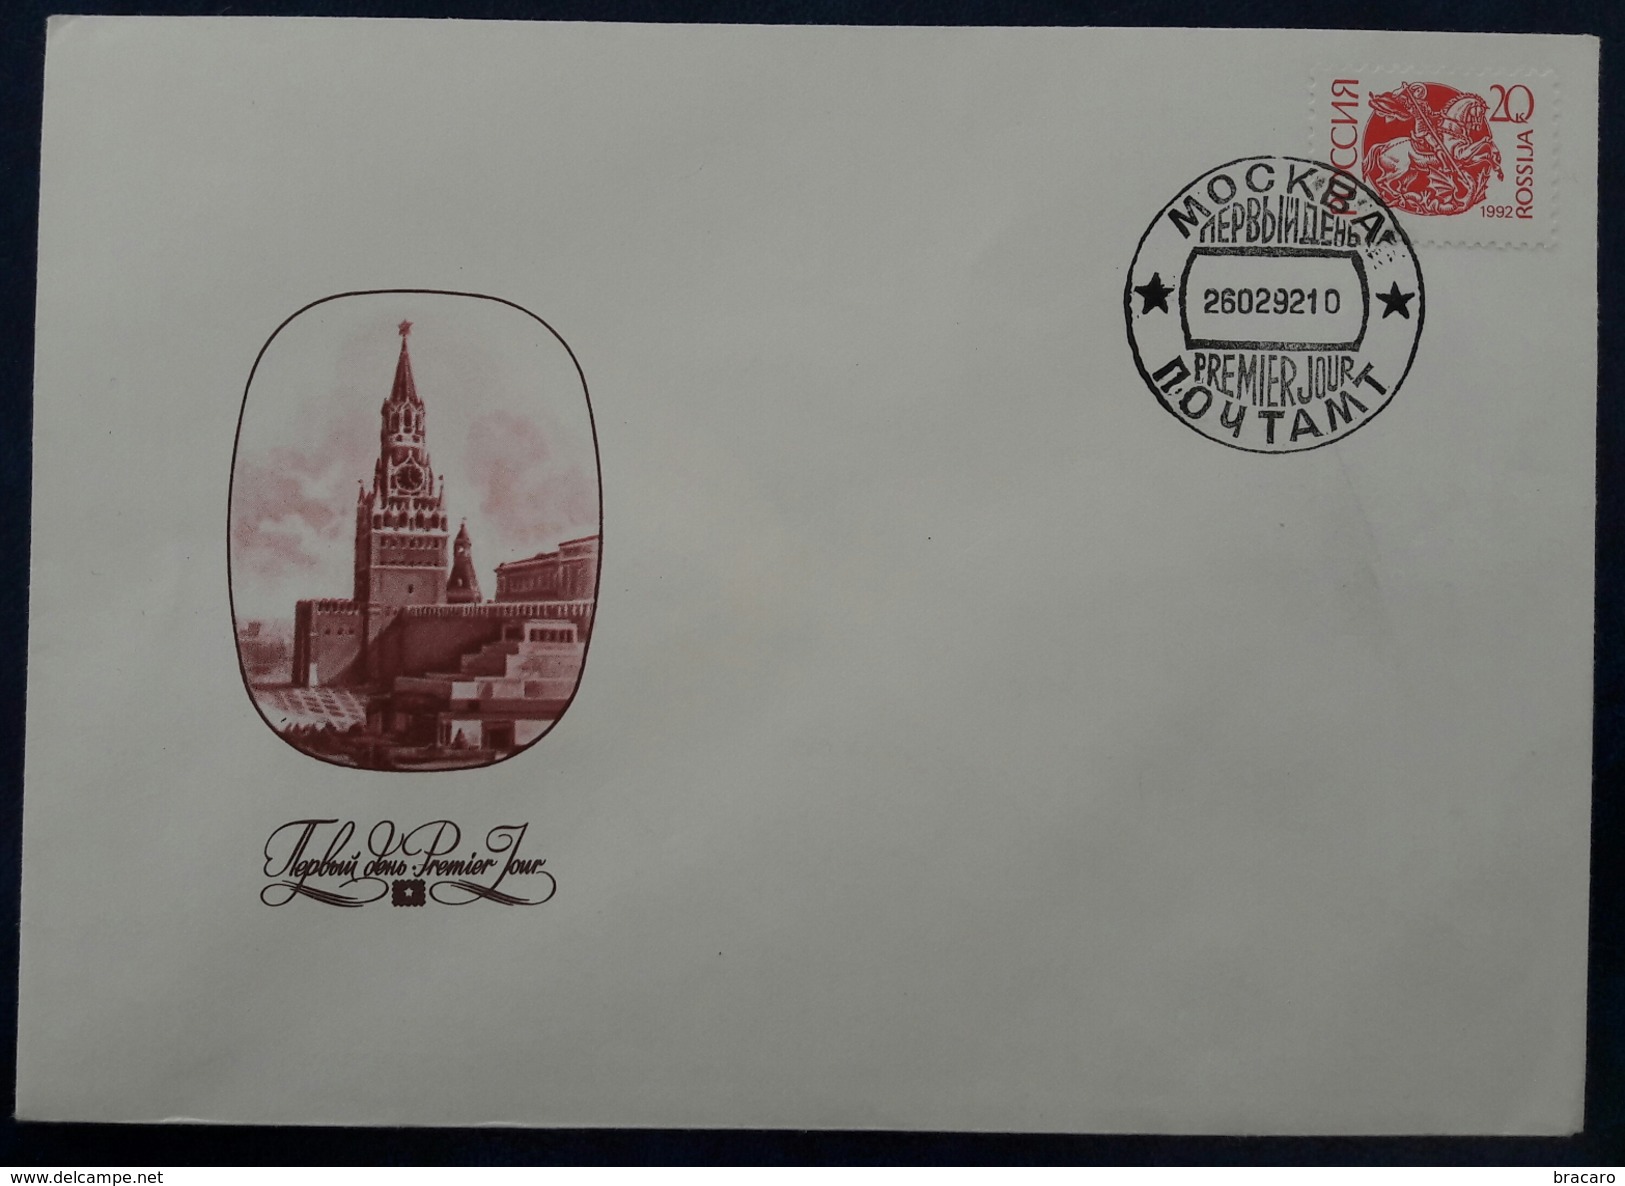 FDC Nº 1034 - RUSSIA / USSR / CCCP - Moscow 26.02.1992 - FDC